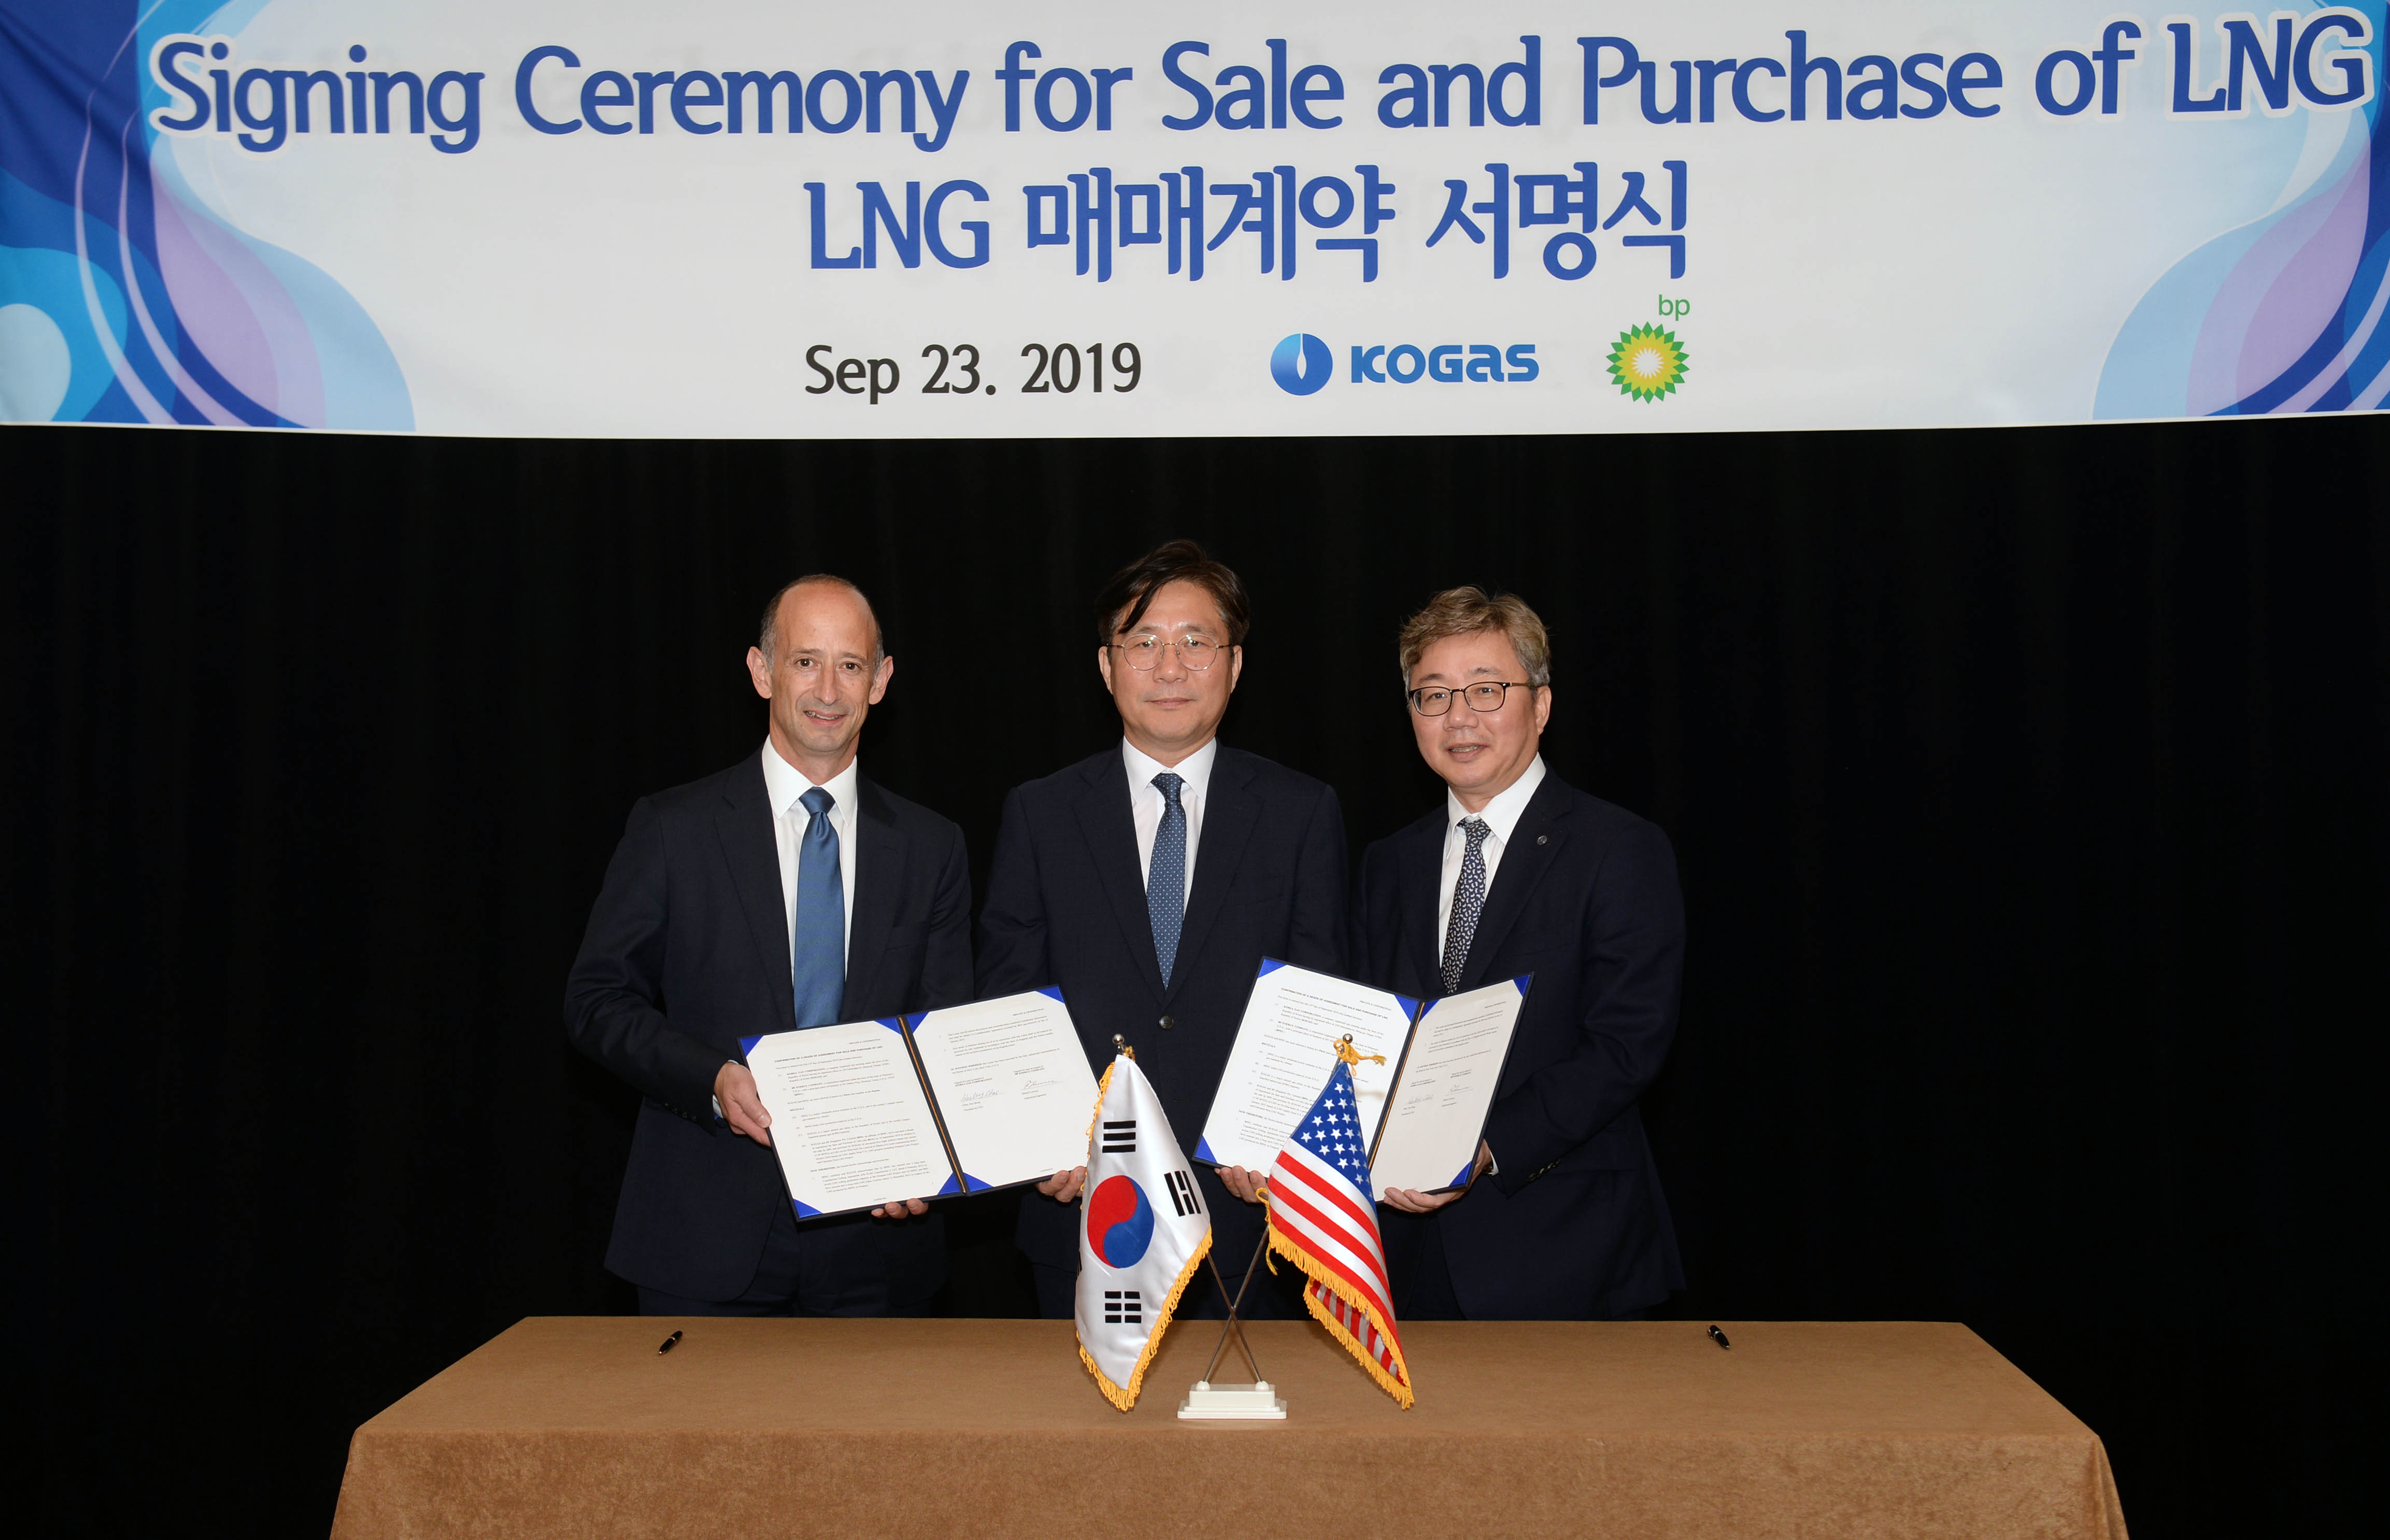 Kogas inks long-term LNG supply deal with BP